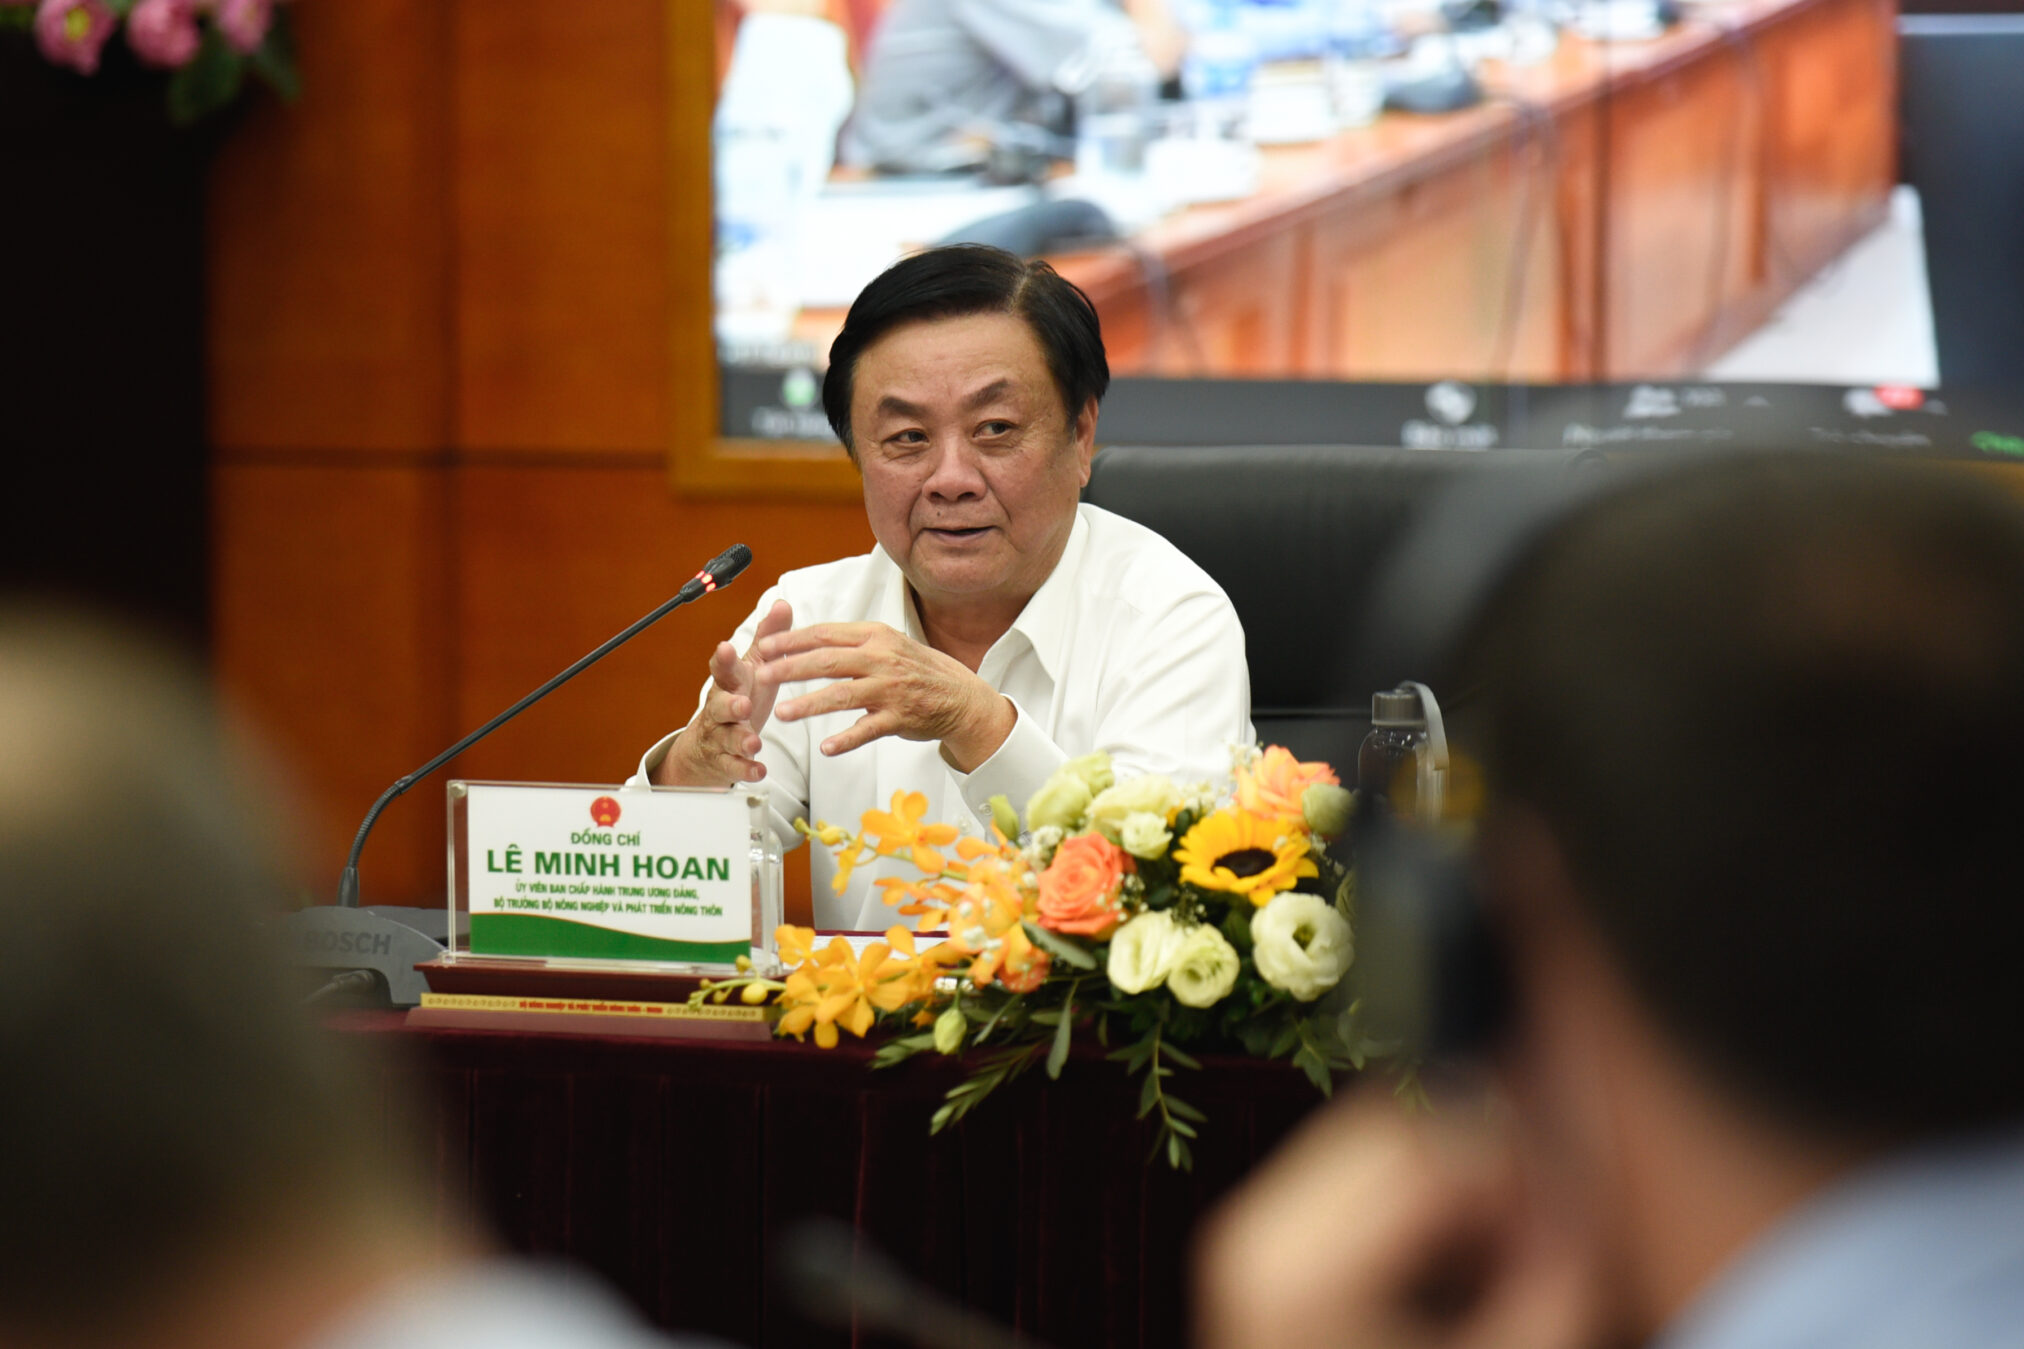 Minister Le Minh Hoan: Developing a sustainable coffee industry means leaving no one behind